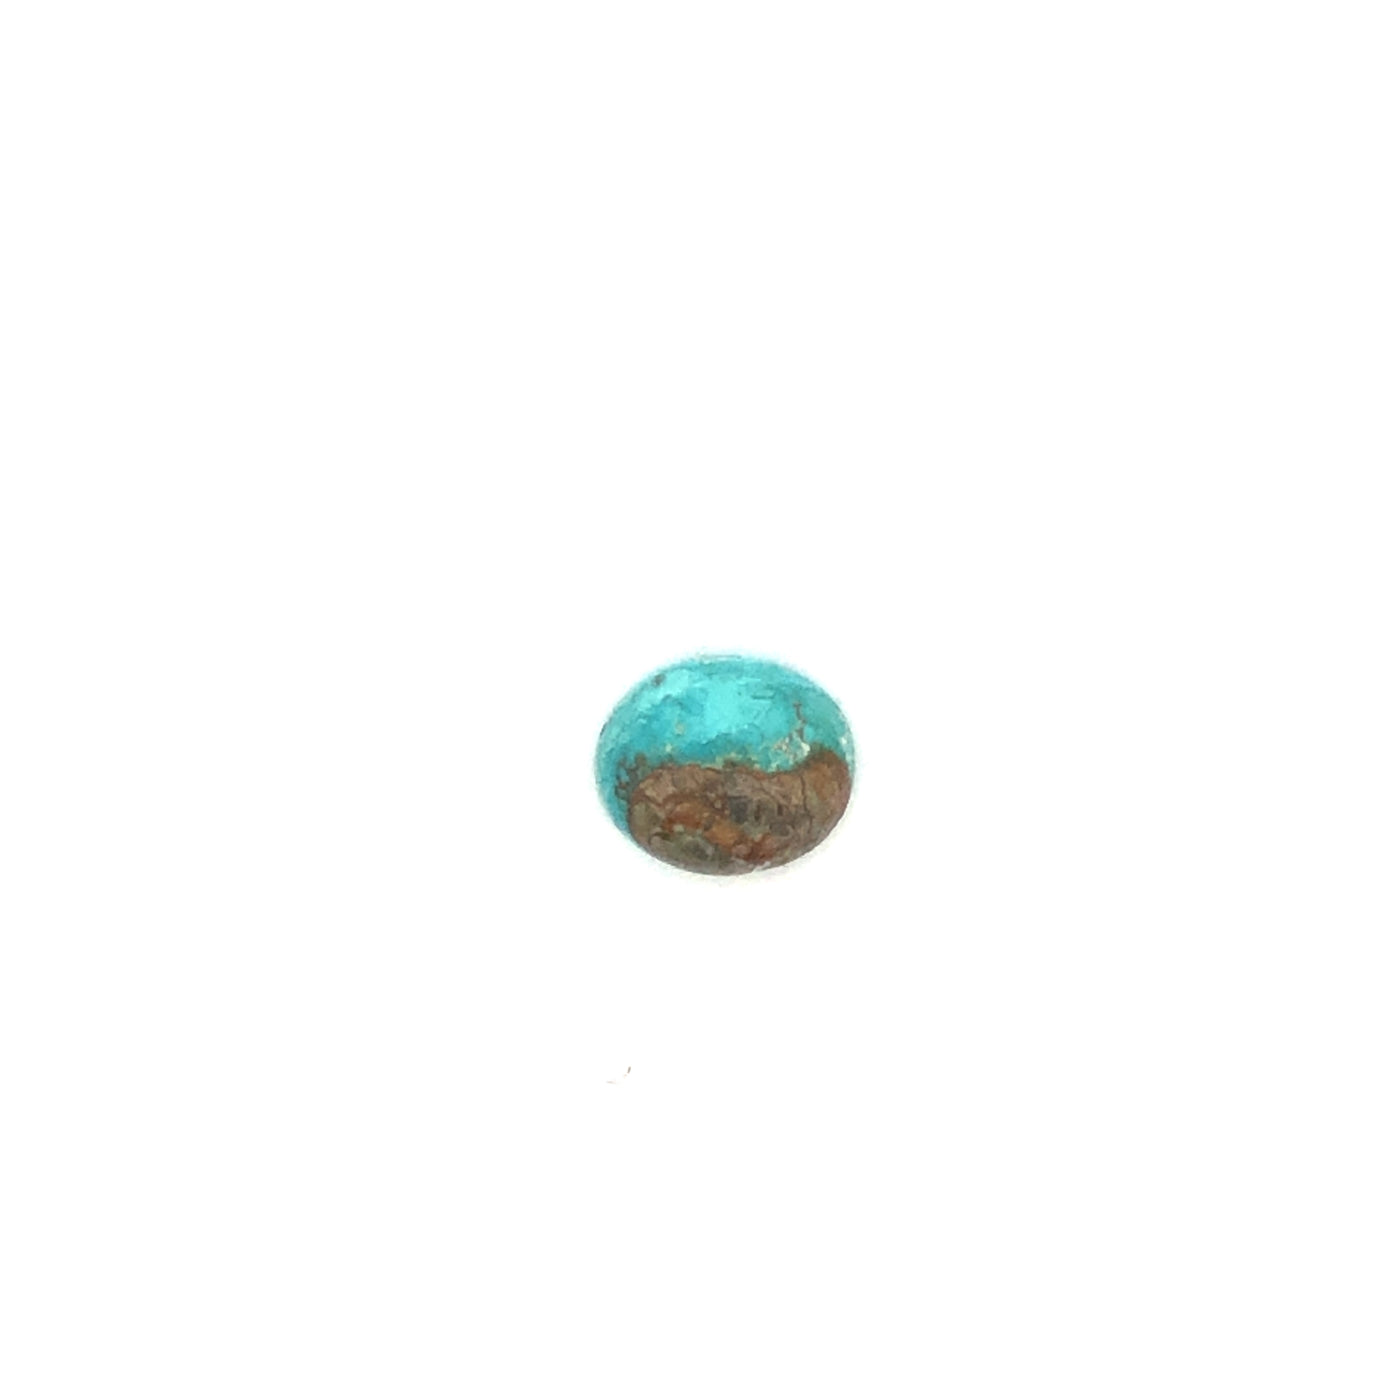 Loose Narooma Turquoise Oval Shaped 4.36Ct Blue With Some Brown